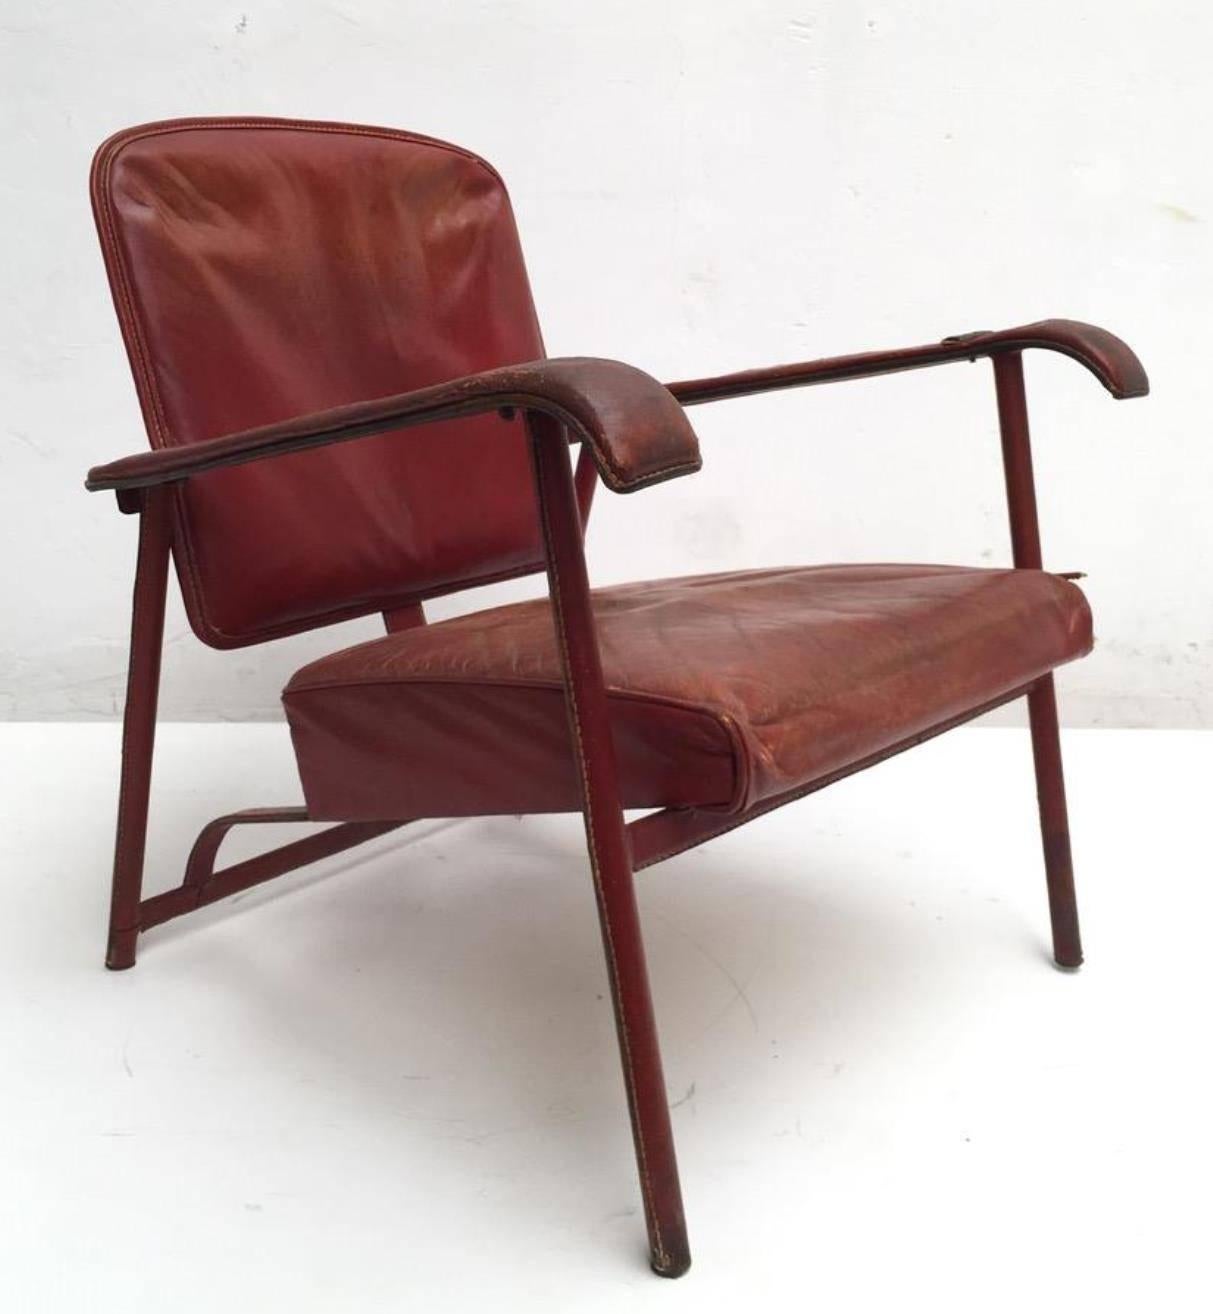 Enameled Rare Pair of Original Vintage Leather Adnet Lounge Chairs France 1950's